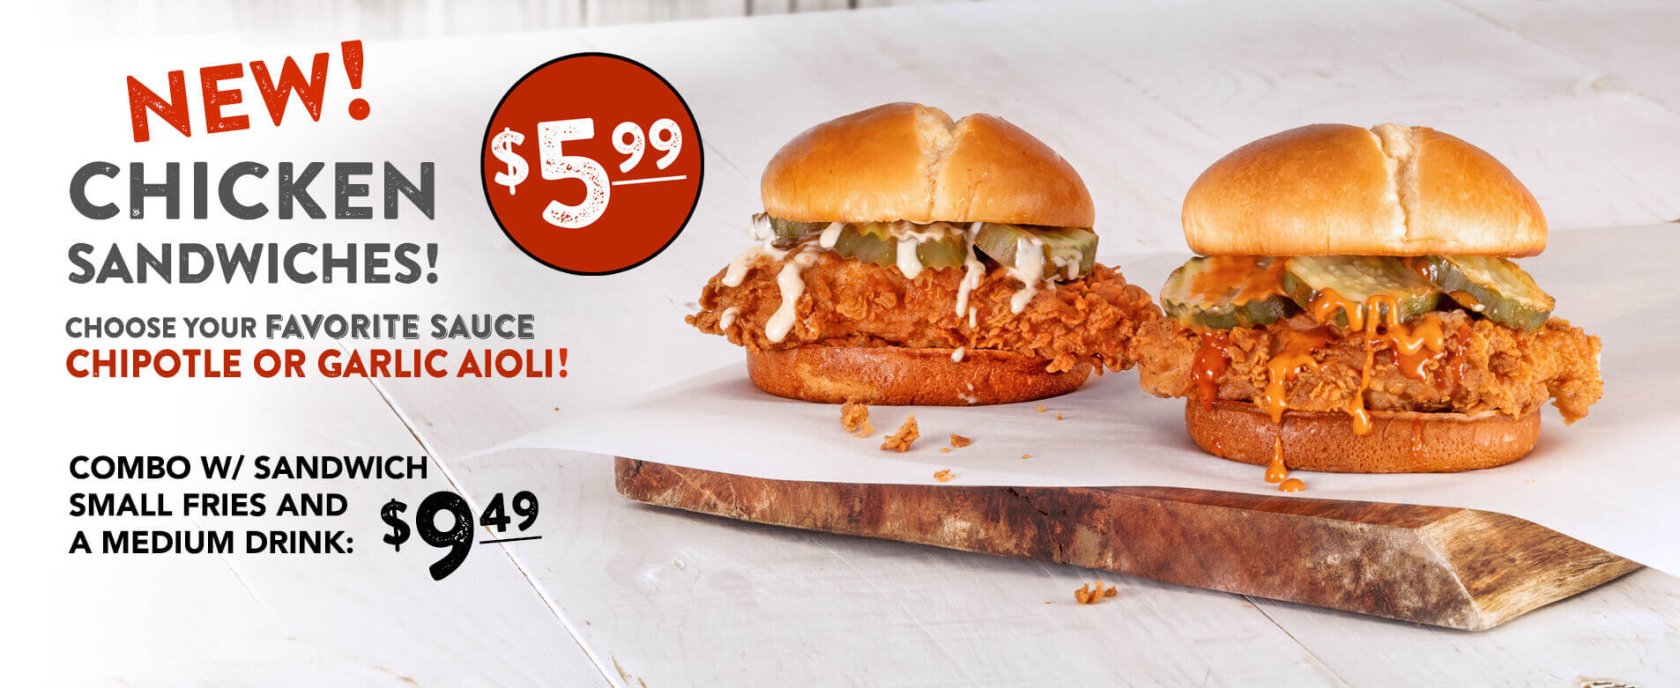 New Chicken Sandwiches! - $5.99 - Combo - $9.49